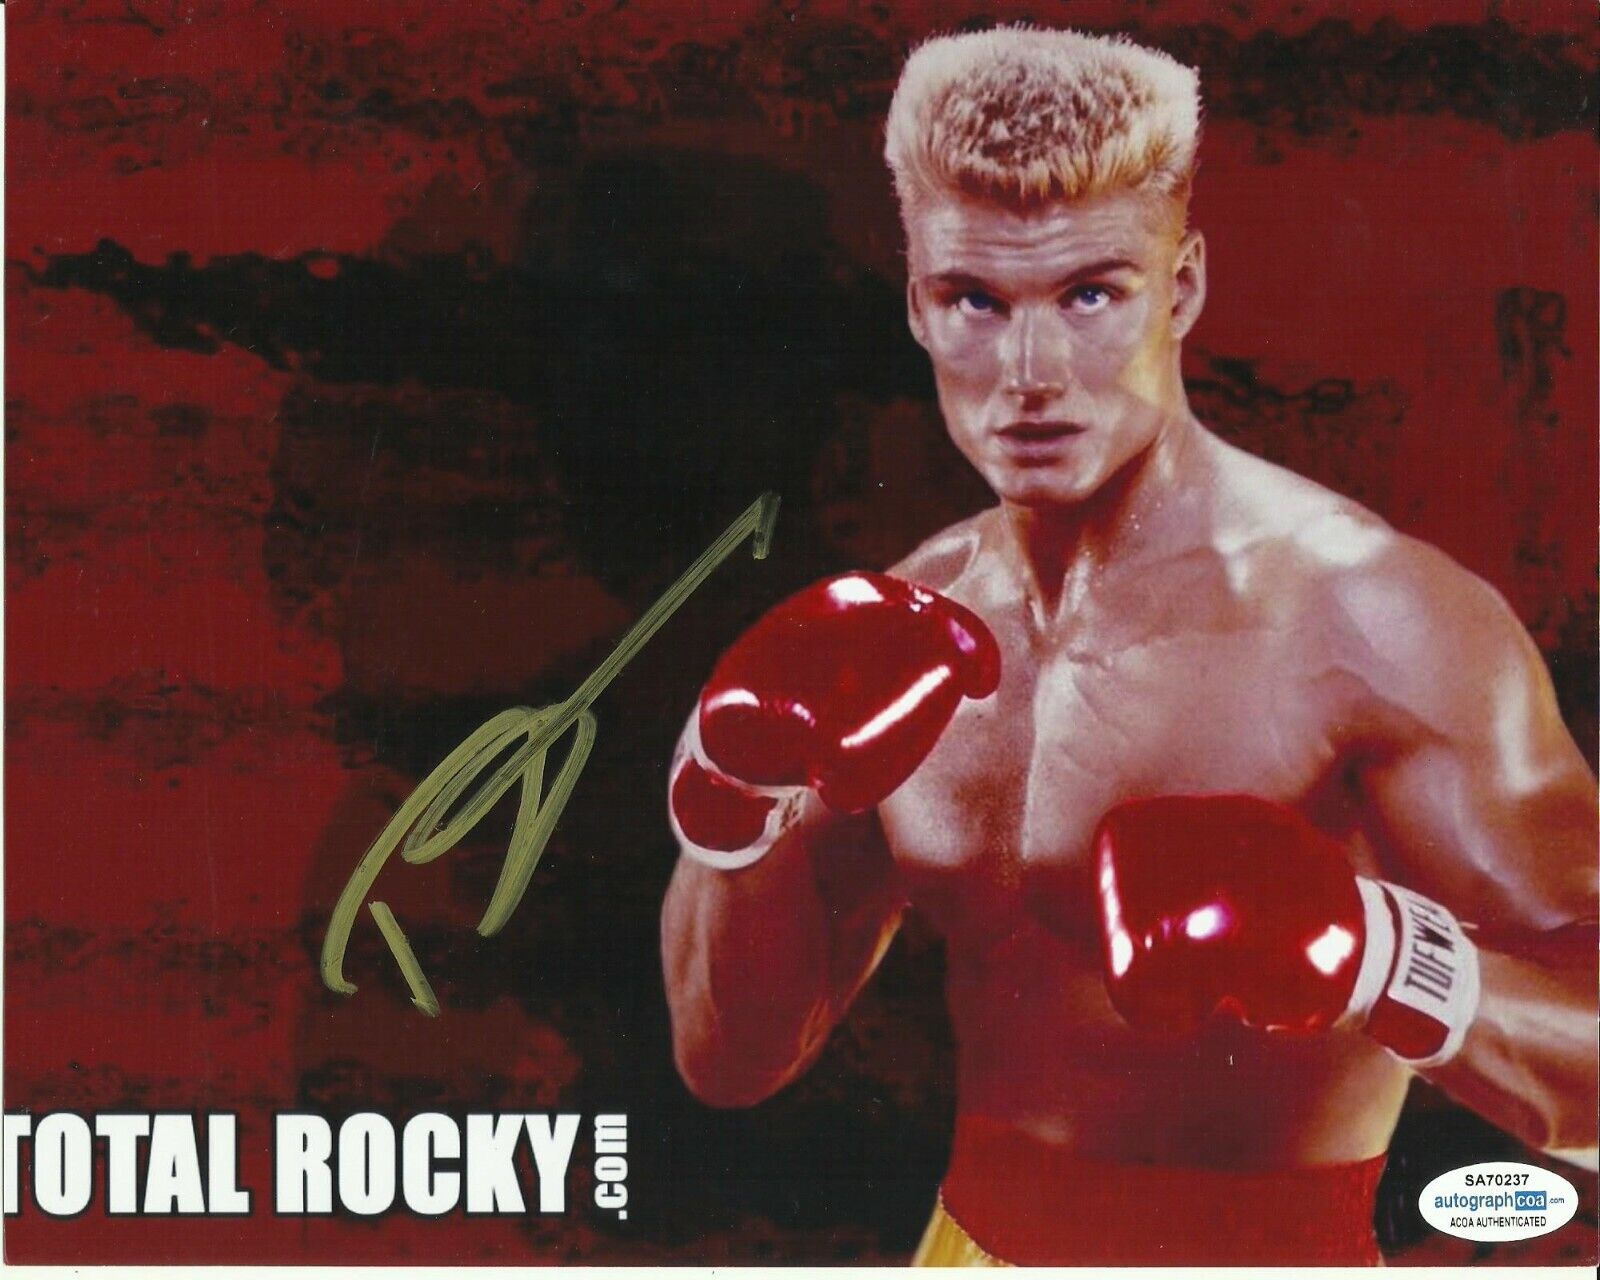 DOLPH LUNDGREN SIGNED ROCKY Photo Poster painting UACC REG 242 (3) ALSO ACOA CERTIFIED